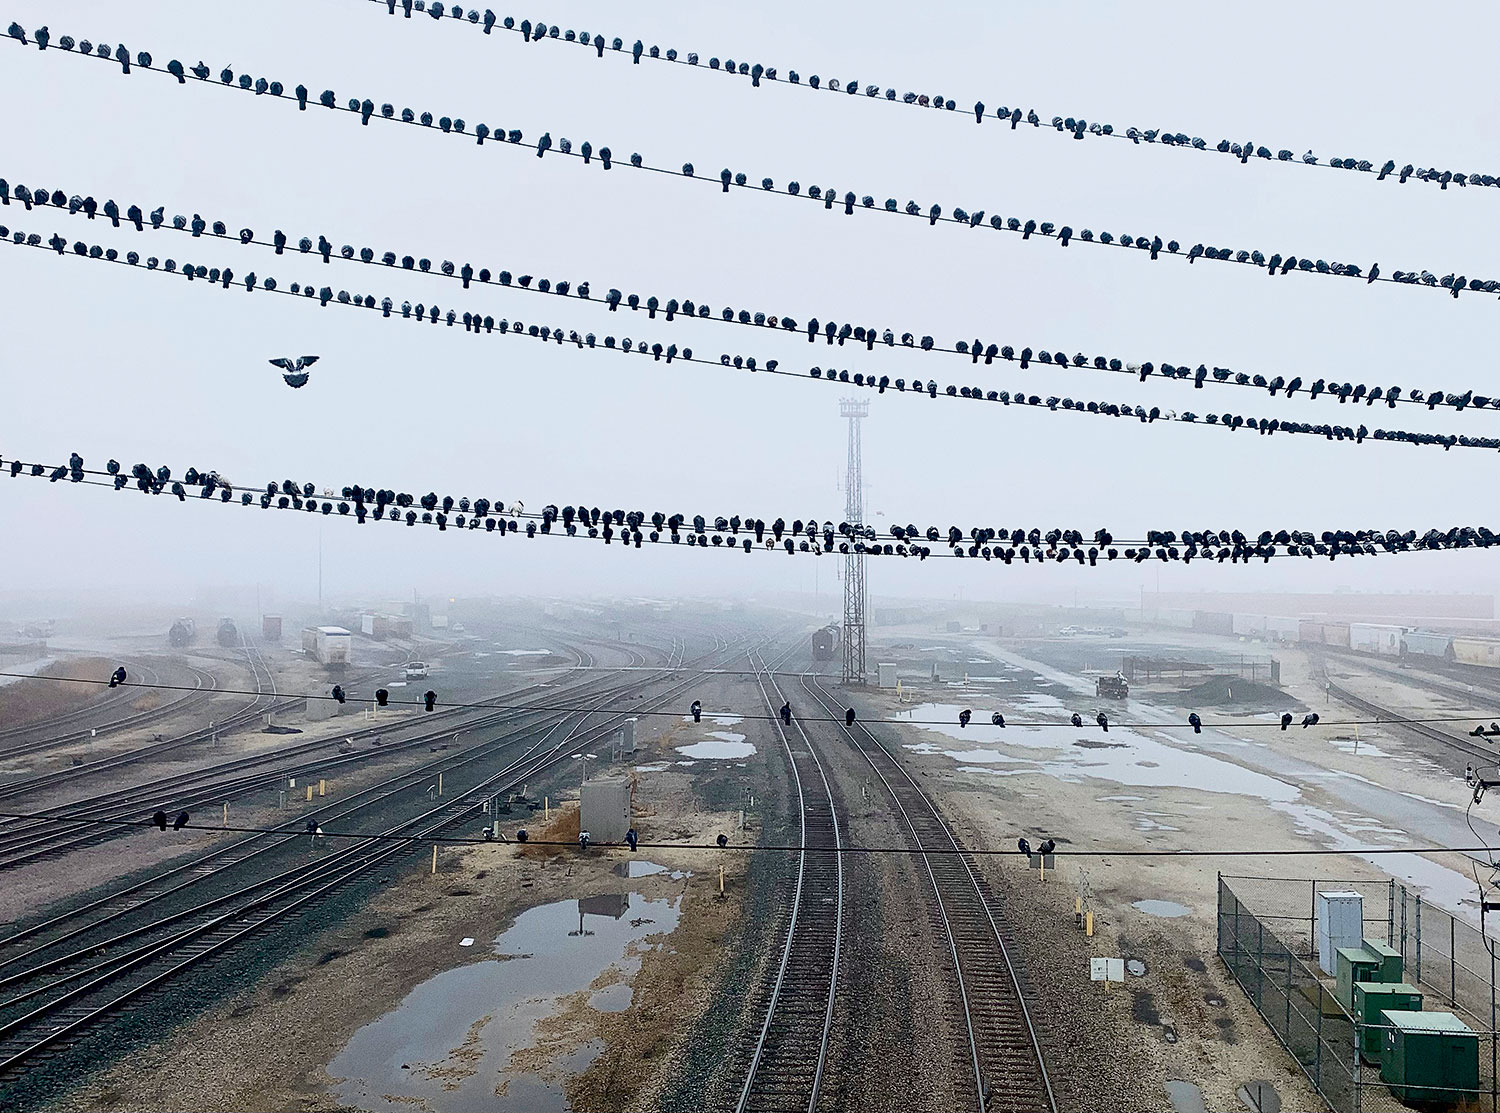 Birds on electrical wires above a train yard near Midway